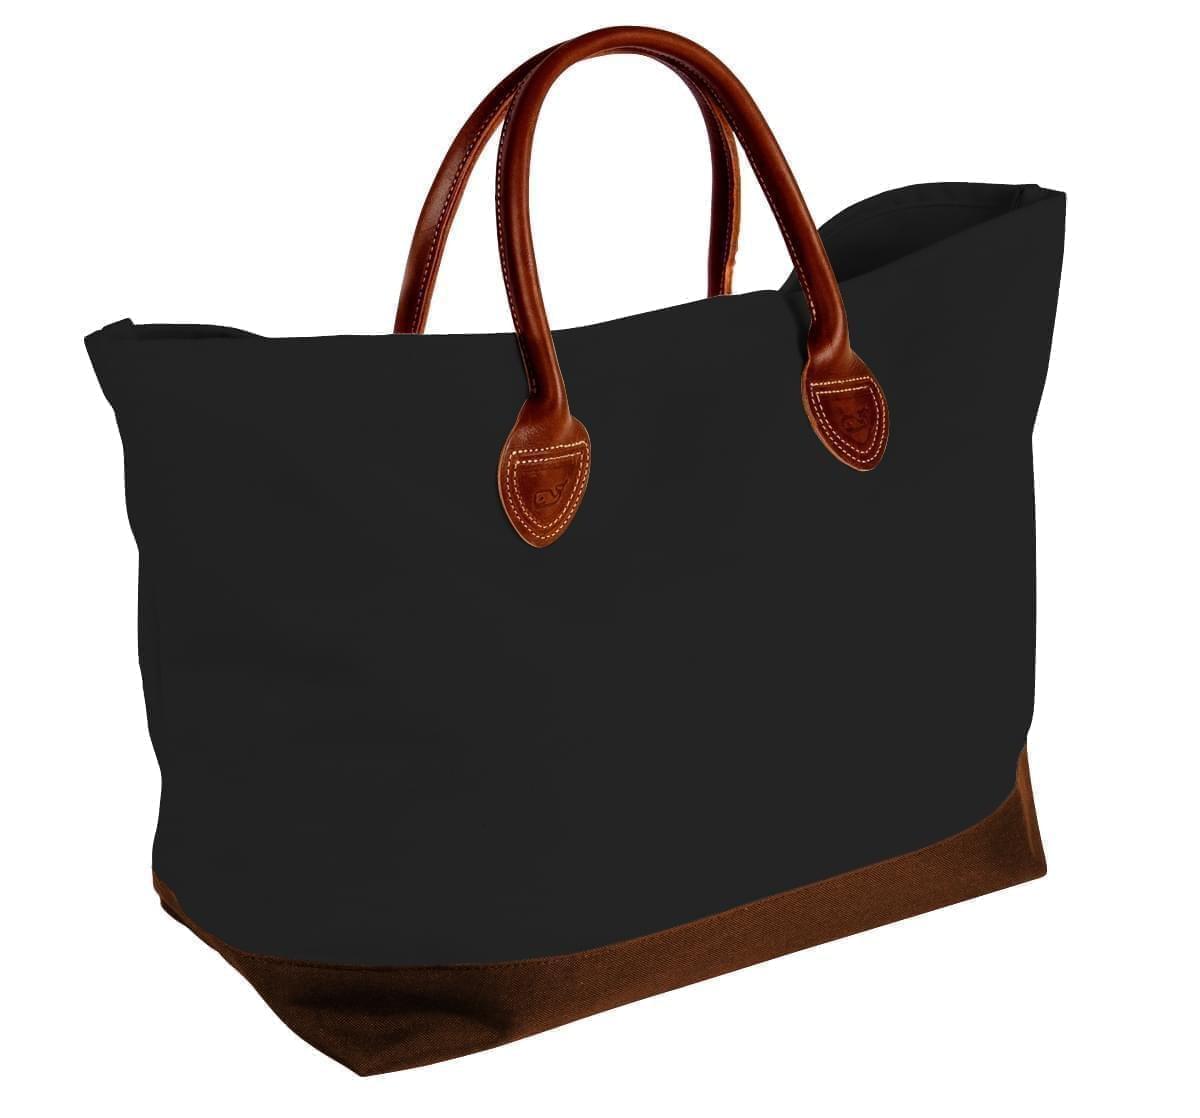 Canvas Leather Handle Tote-Black/Brown-USA Made by Unionspecialties